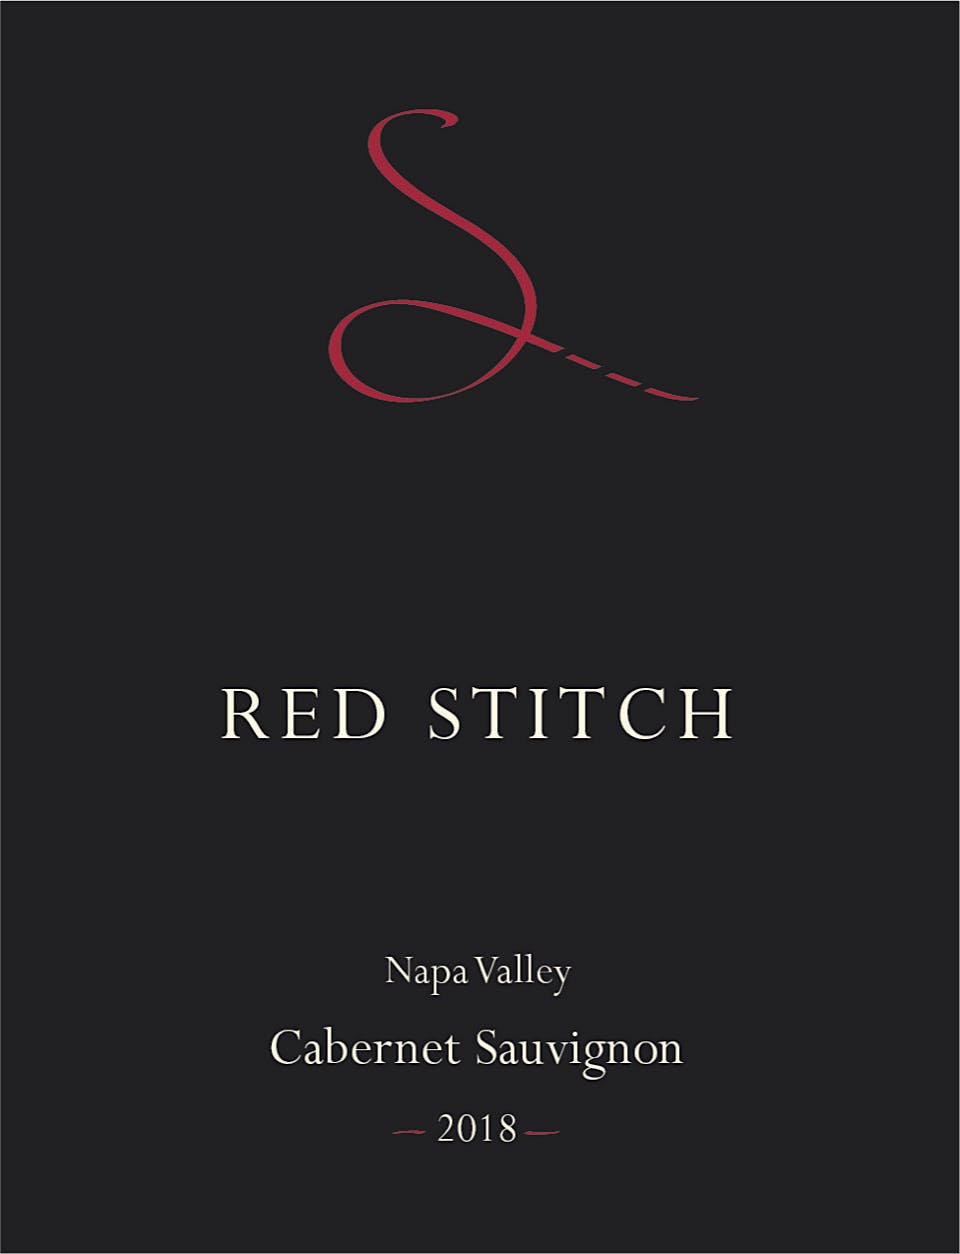 Label for Red Stitch